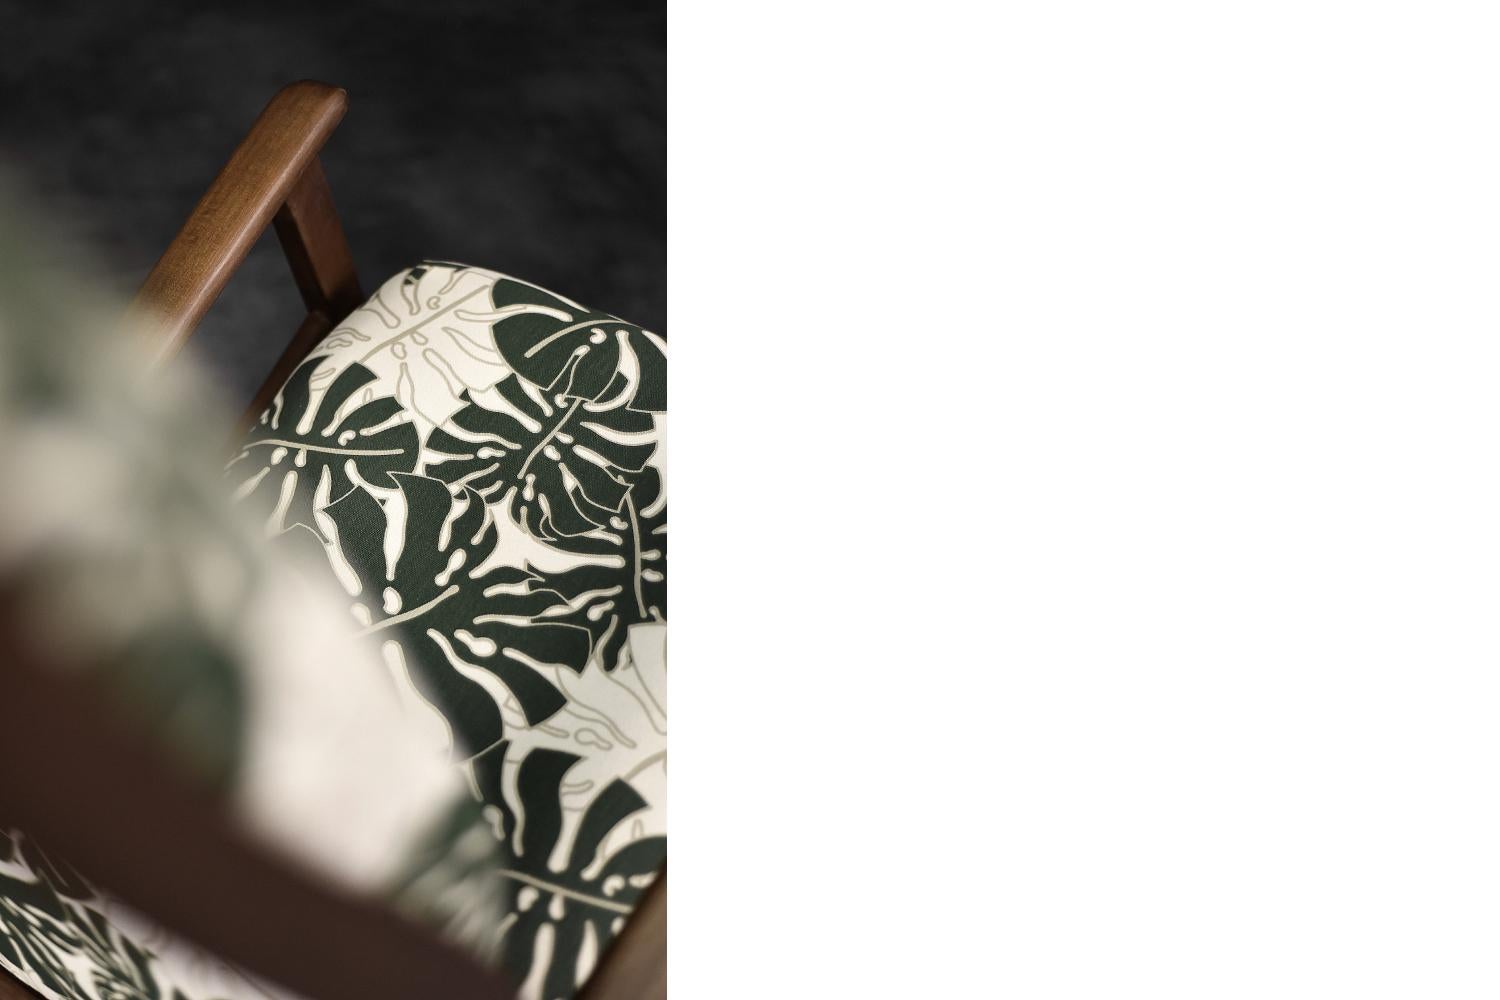 Vintage Danish Modern Rocking Chair in Wood and Monstera Leaf Pattern Fabric For Sale 1